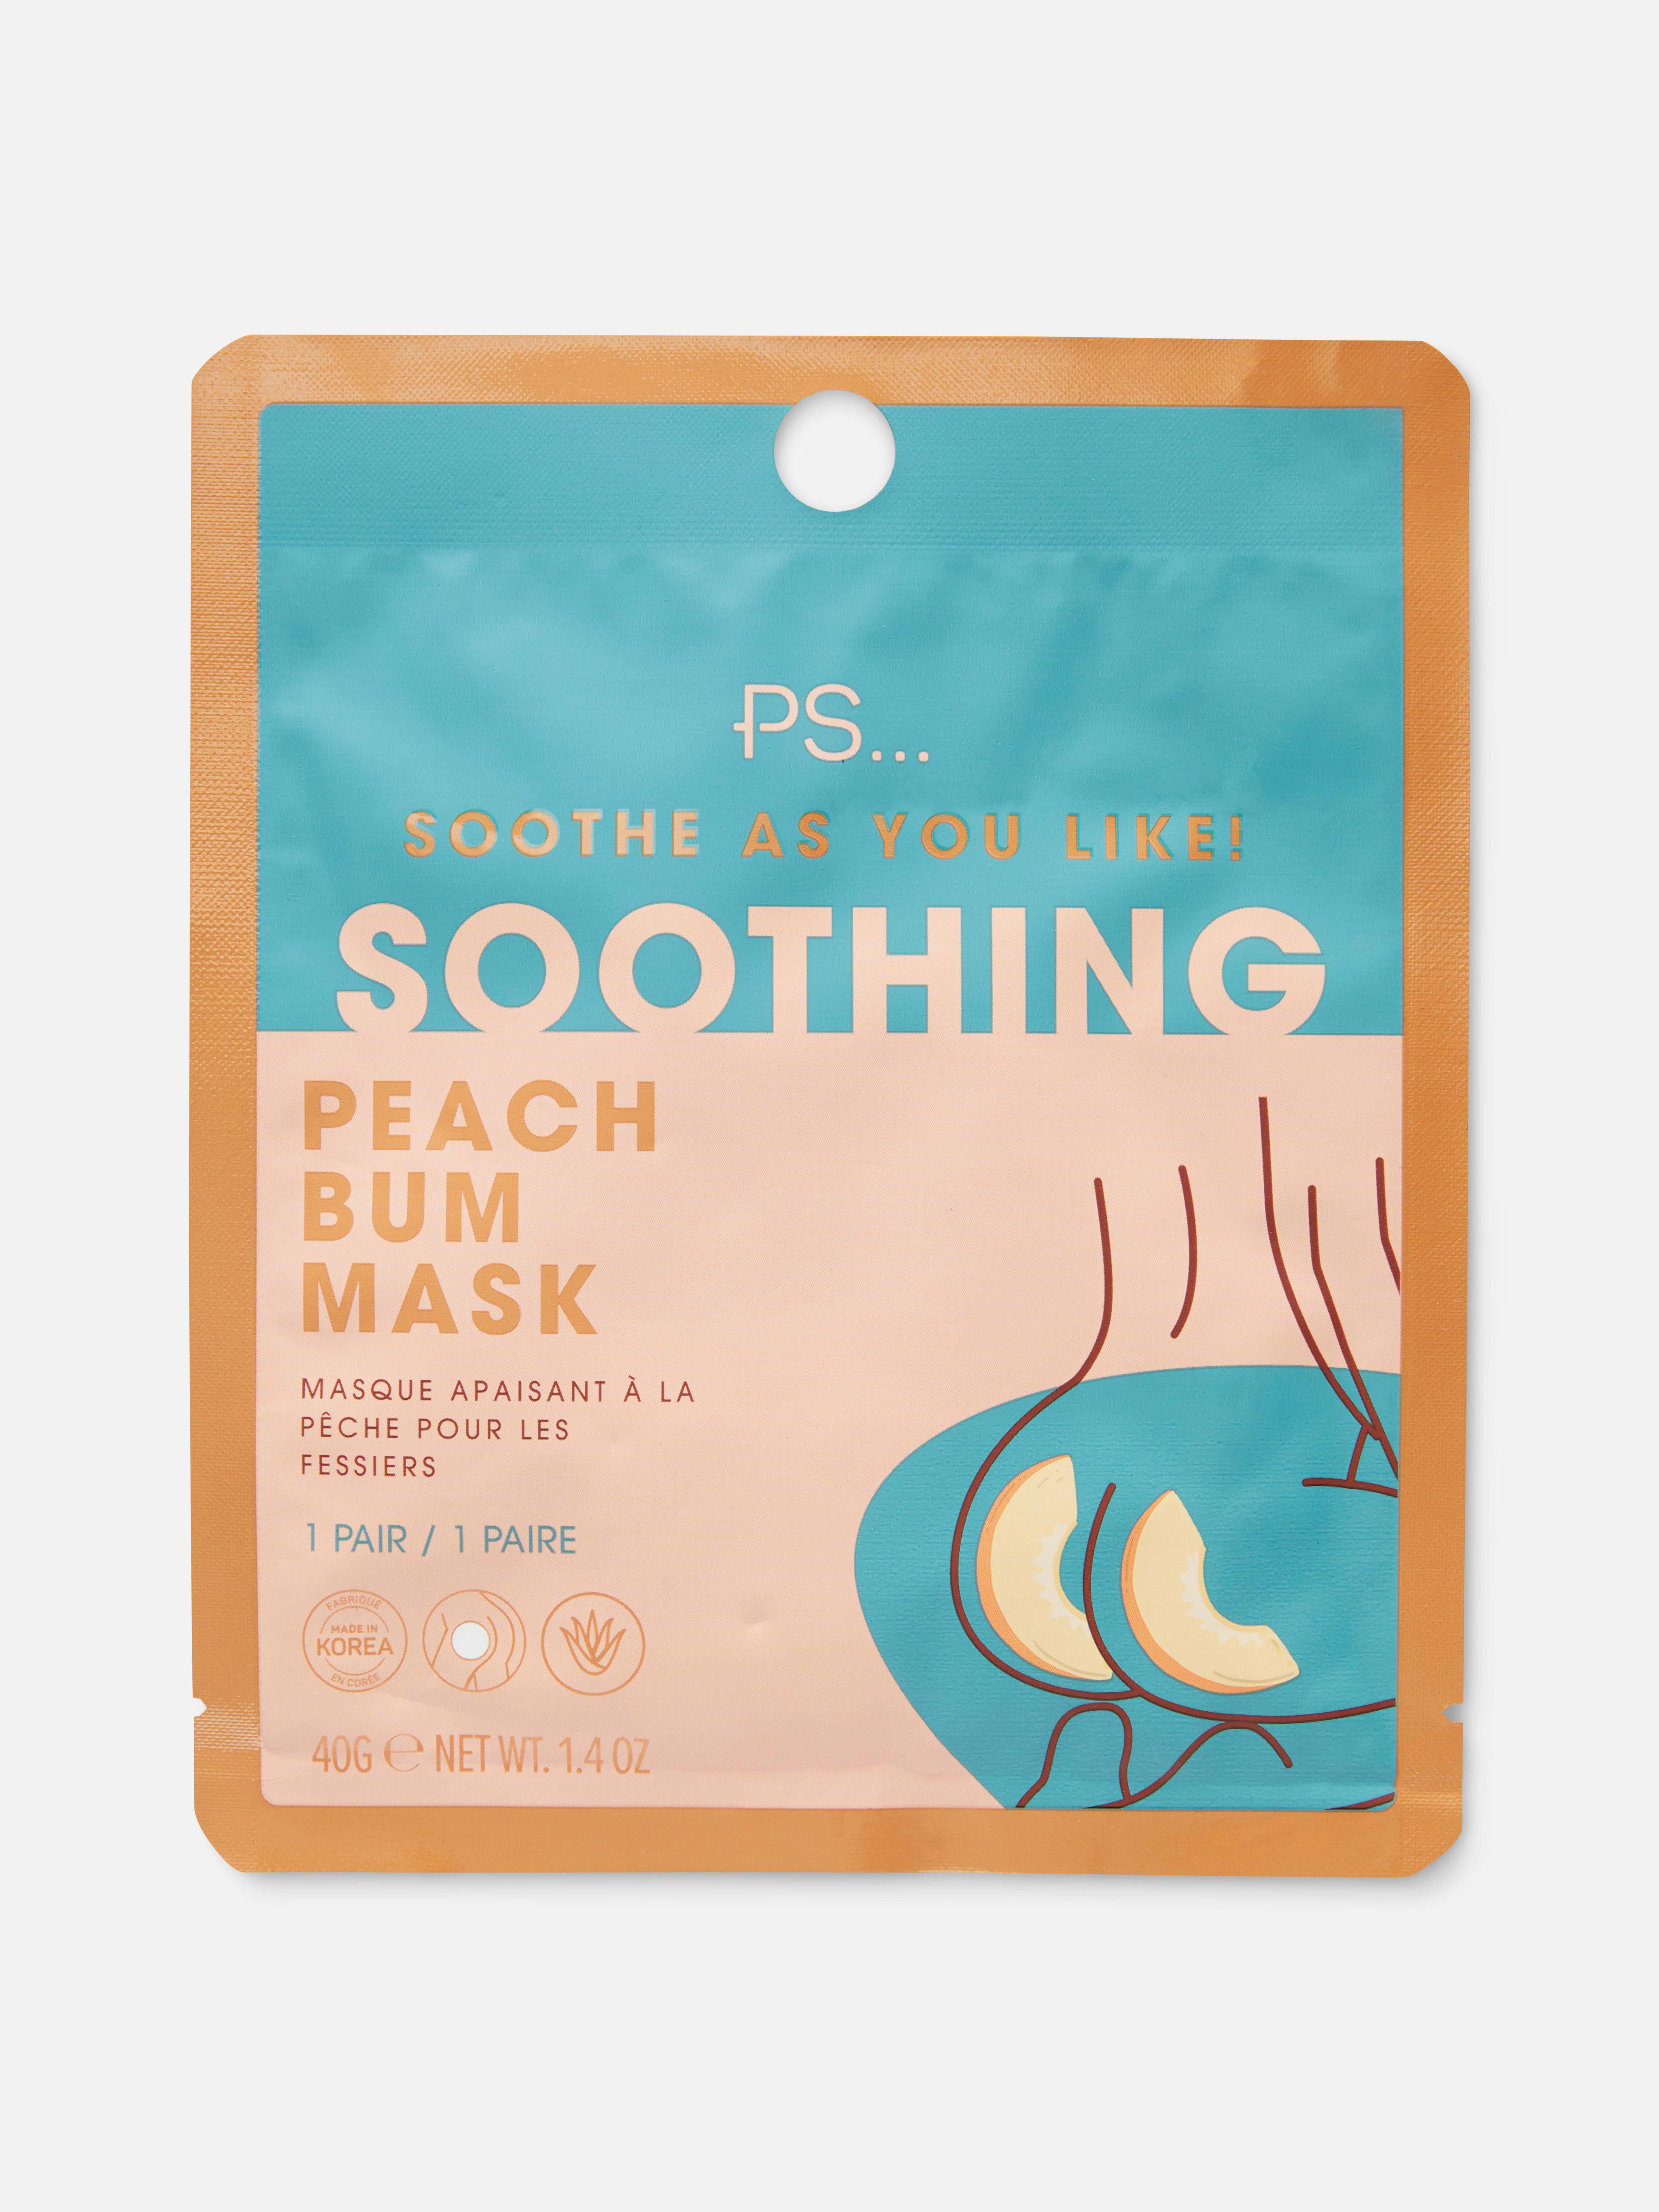 PS Soothing Peach Bum Mask